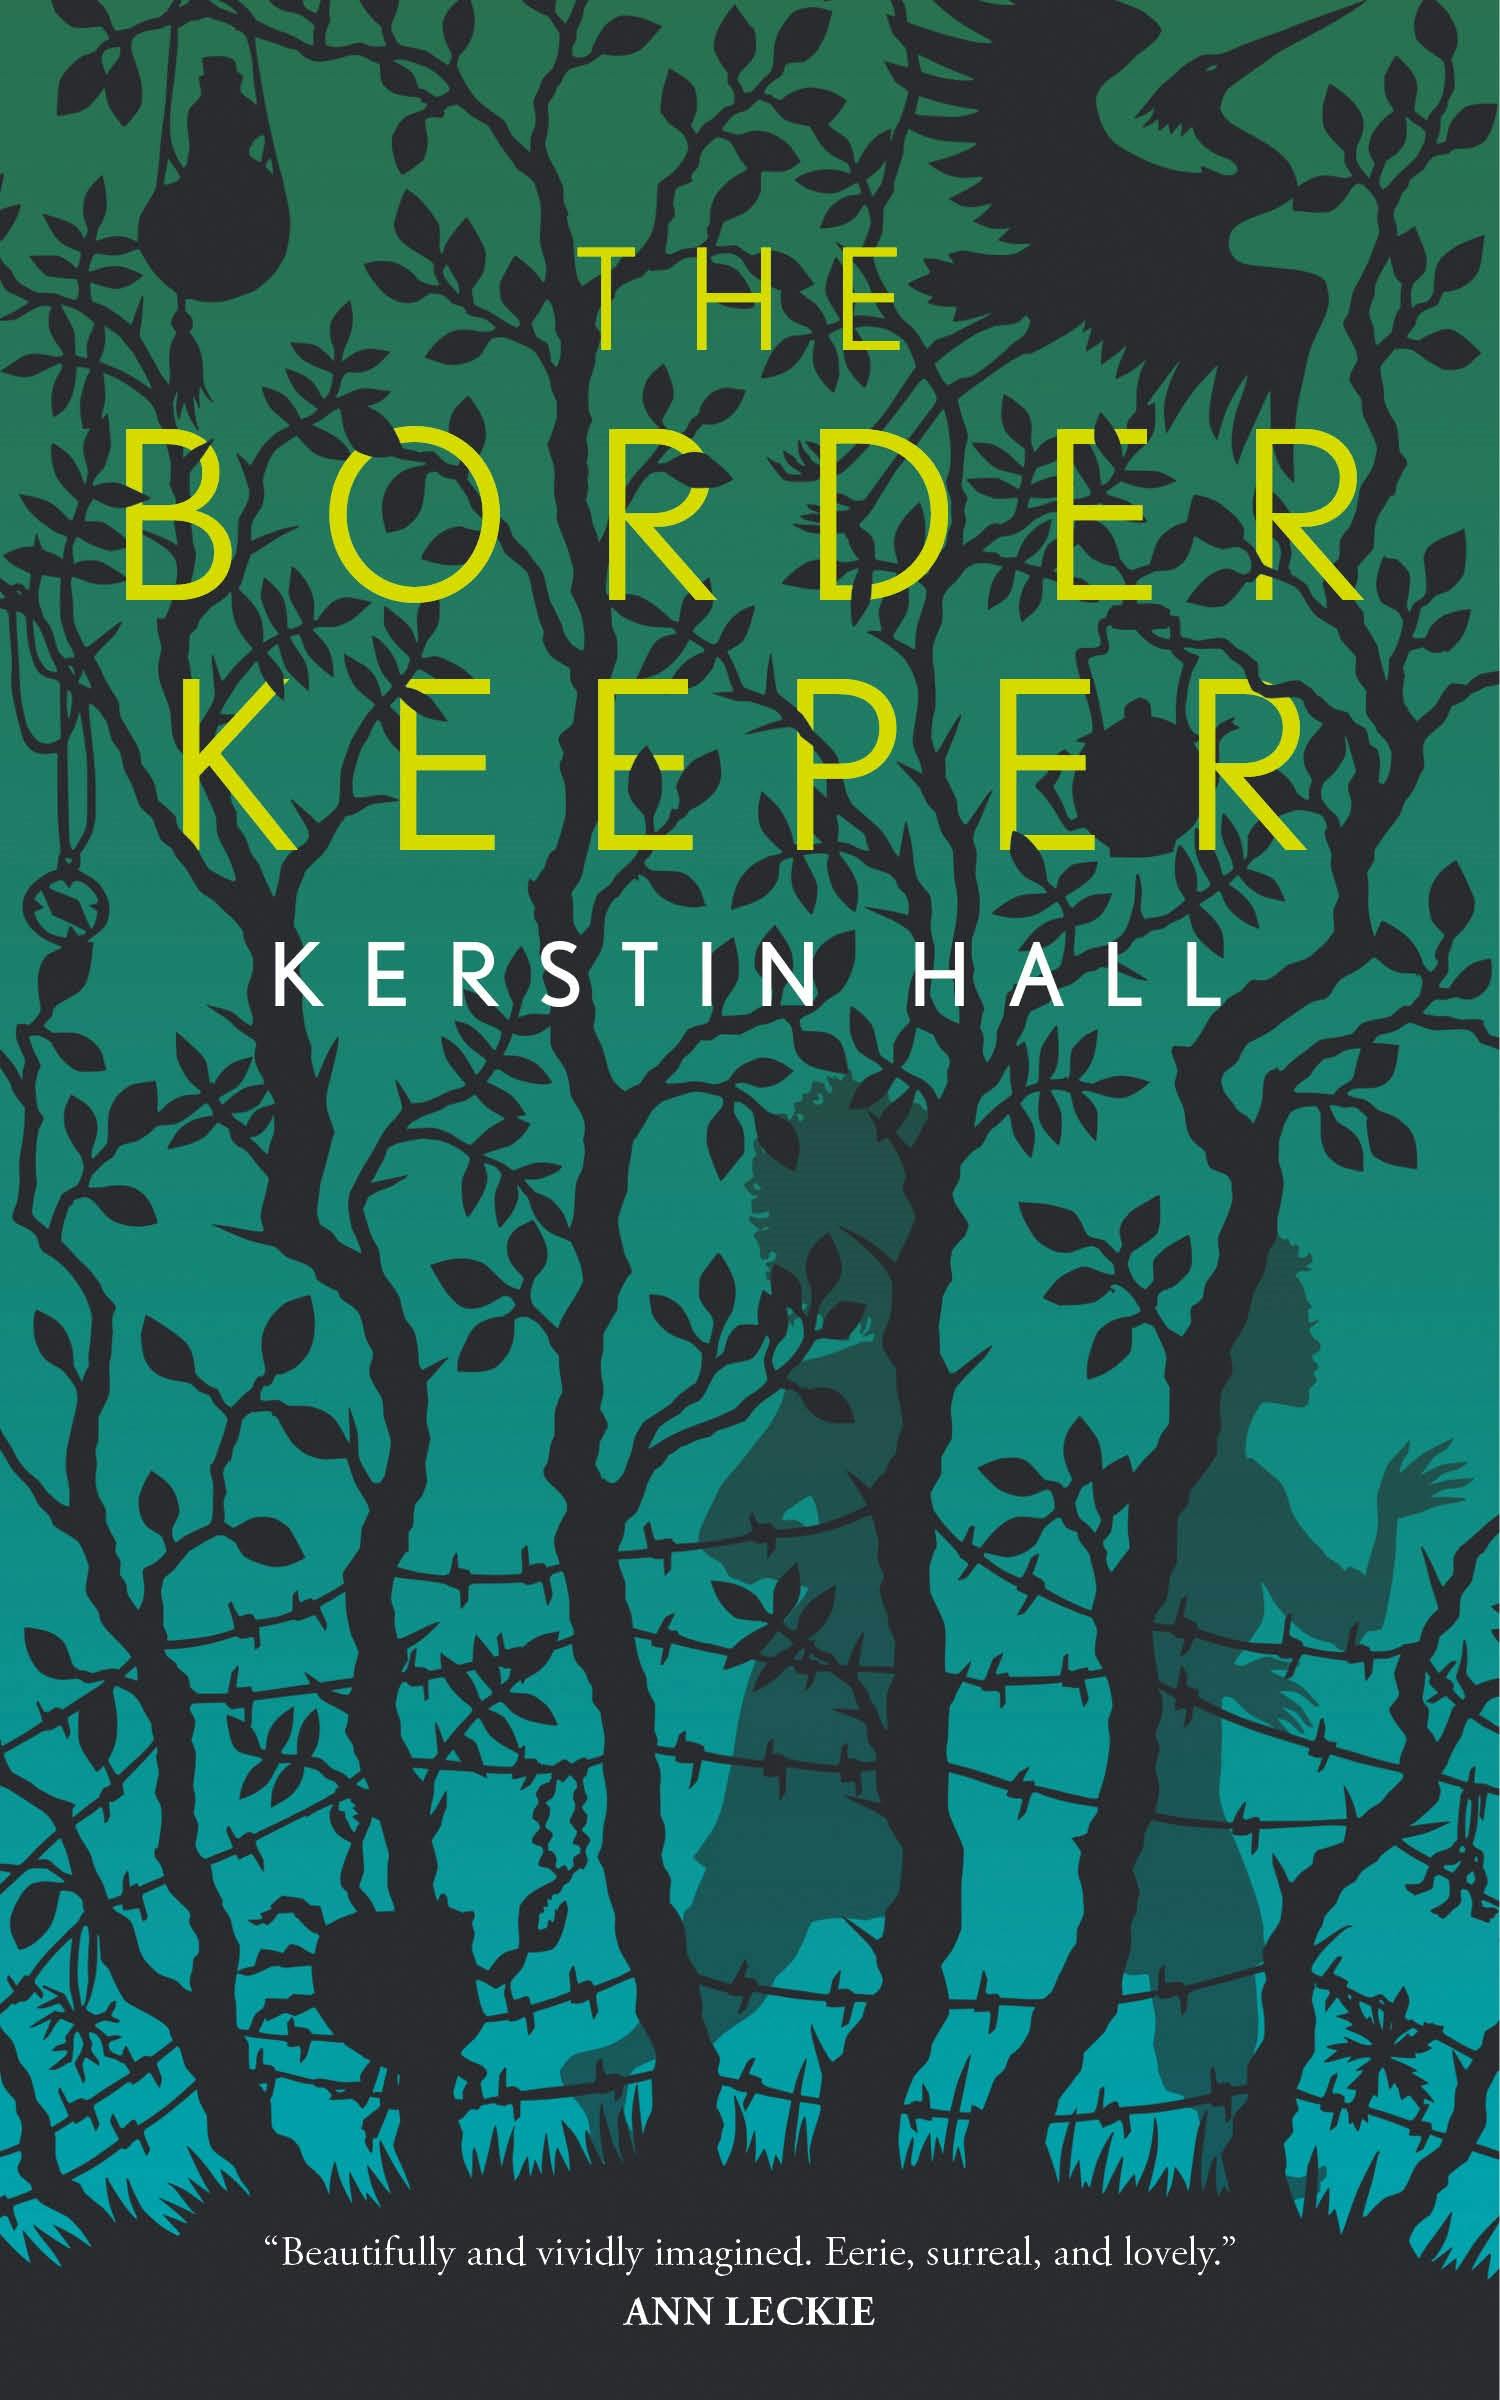 Cover for the book titled as: The Border Keeper